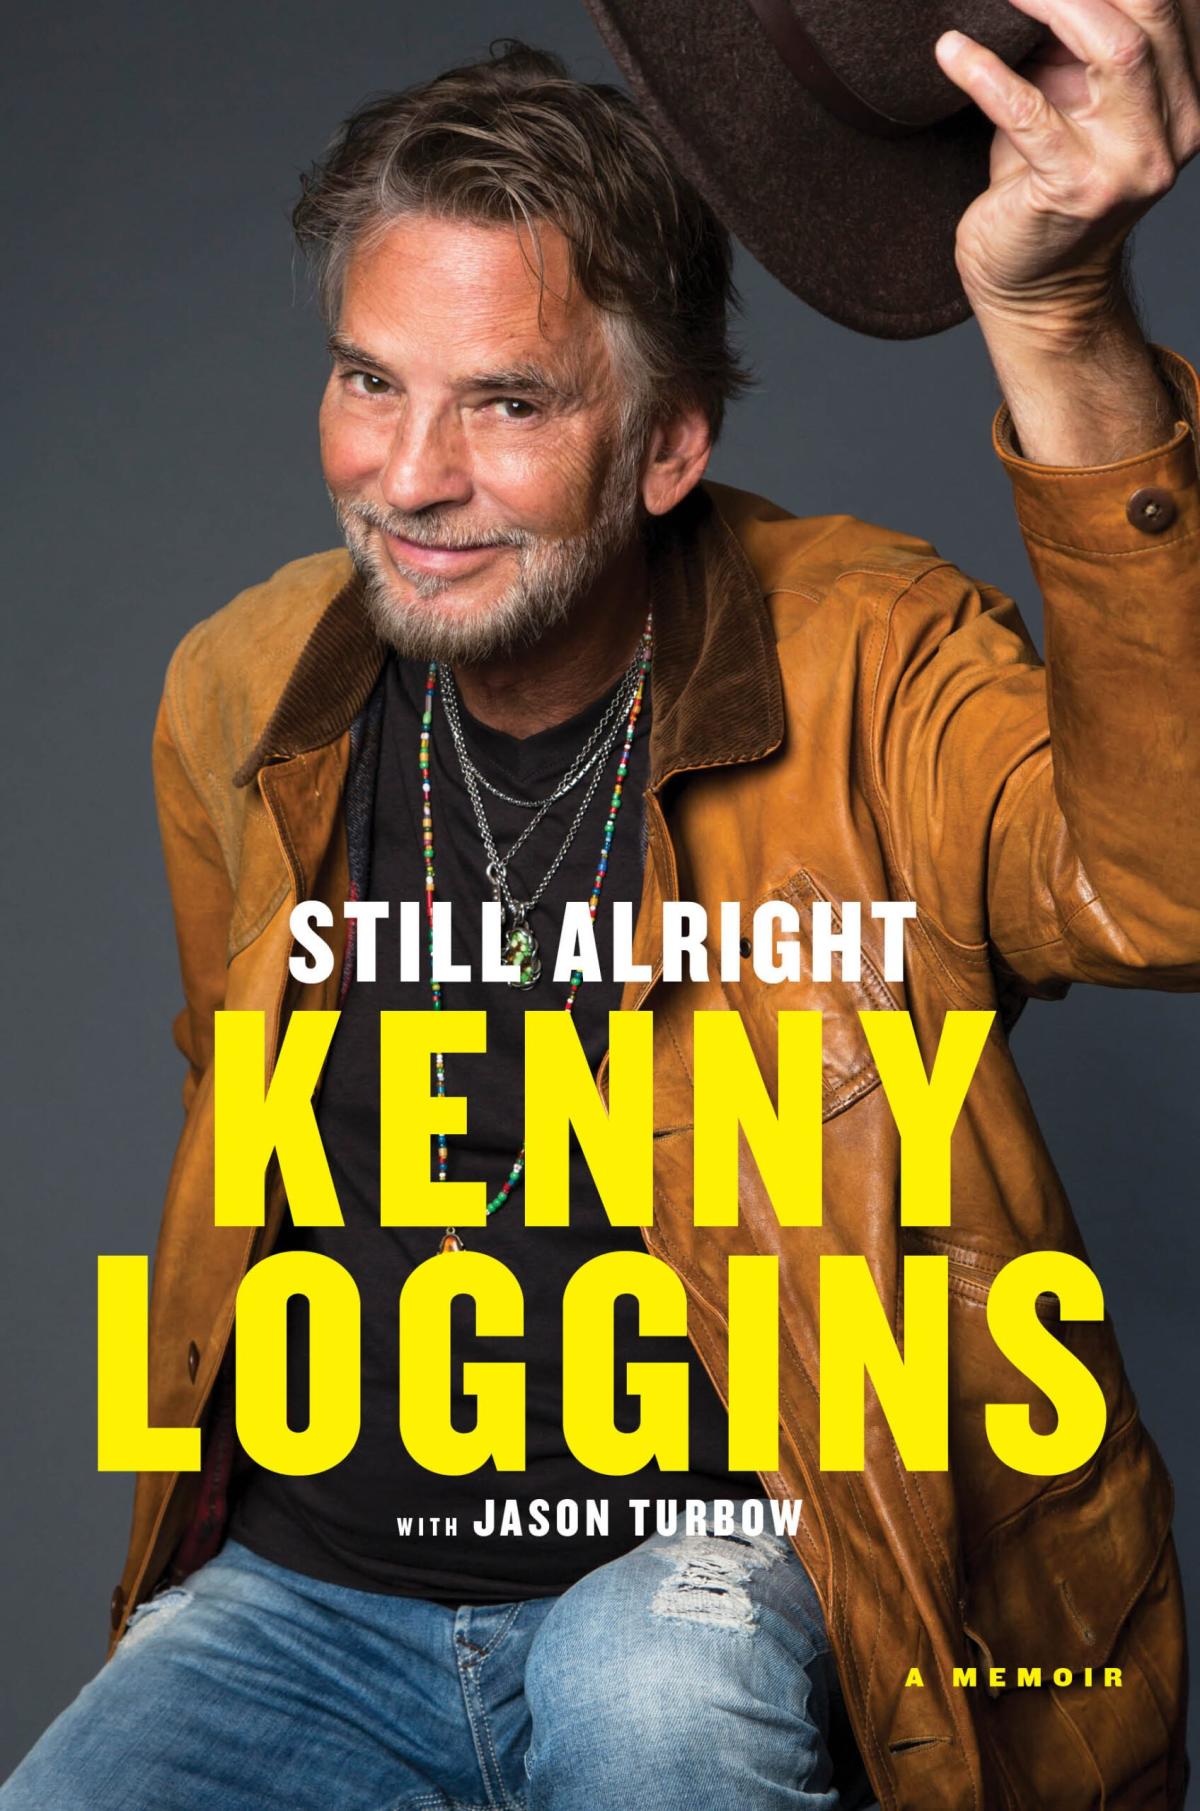 Don't Worry About Him: After 50 Years of Hitmaking, Kenny